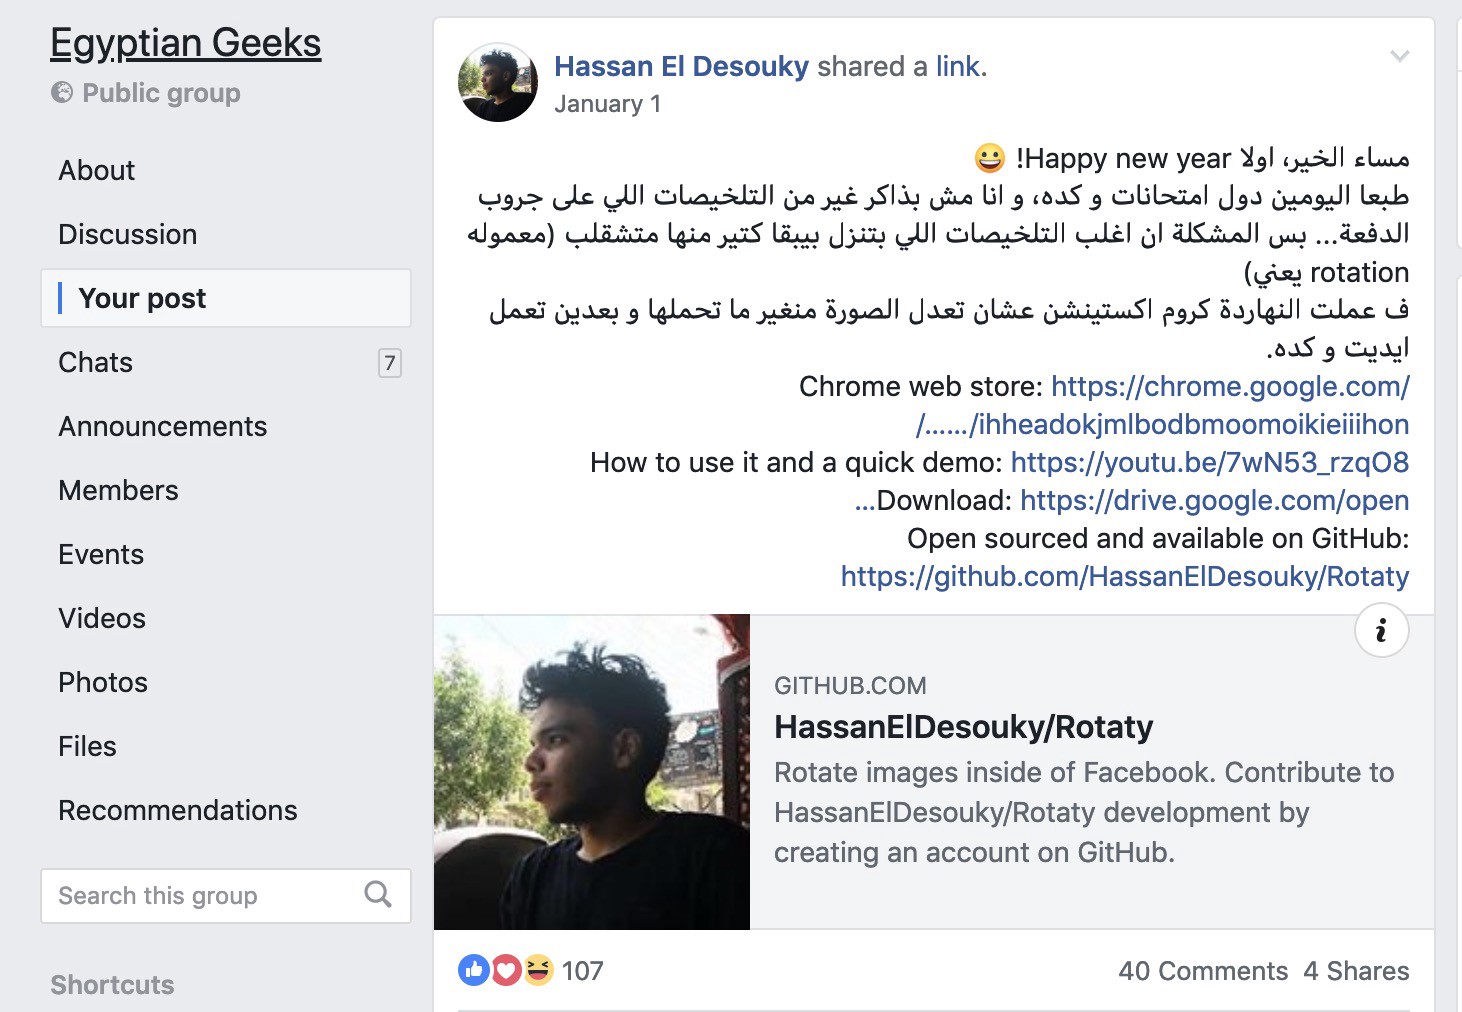 My Facebook post on Egyptian Geeks group